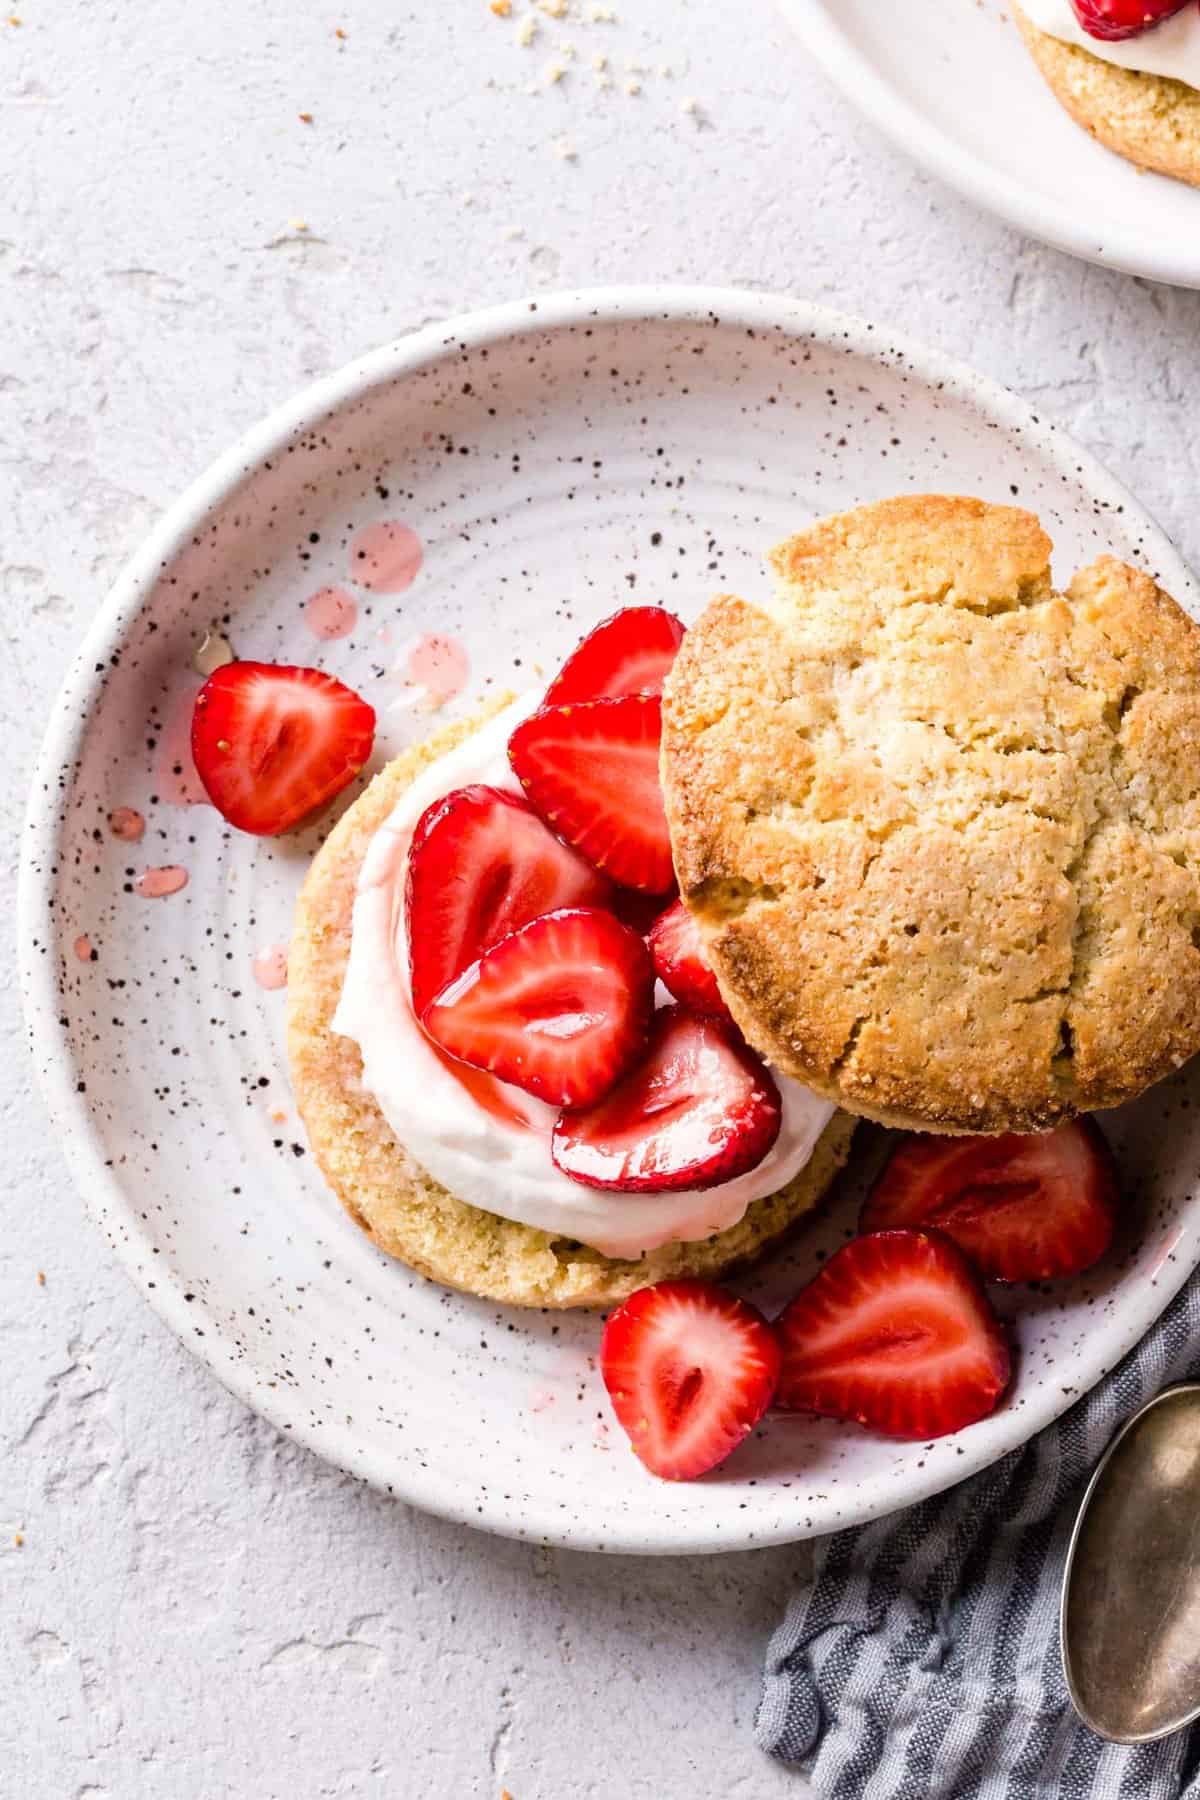 A gluten-free strawberry shortcake on a plate with glistening strawberries, swirls of cream, and a craggy golden biscuit